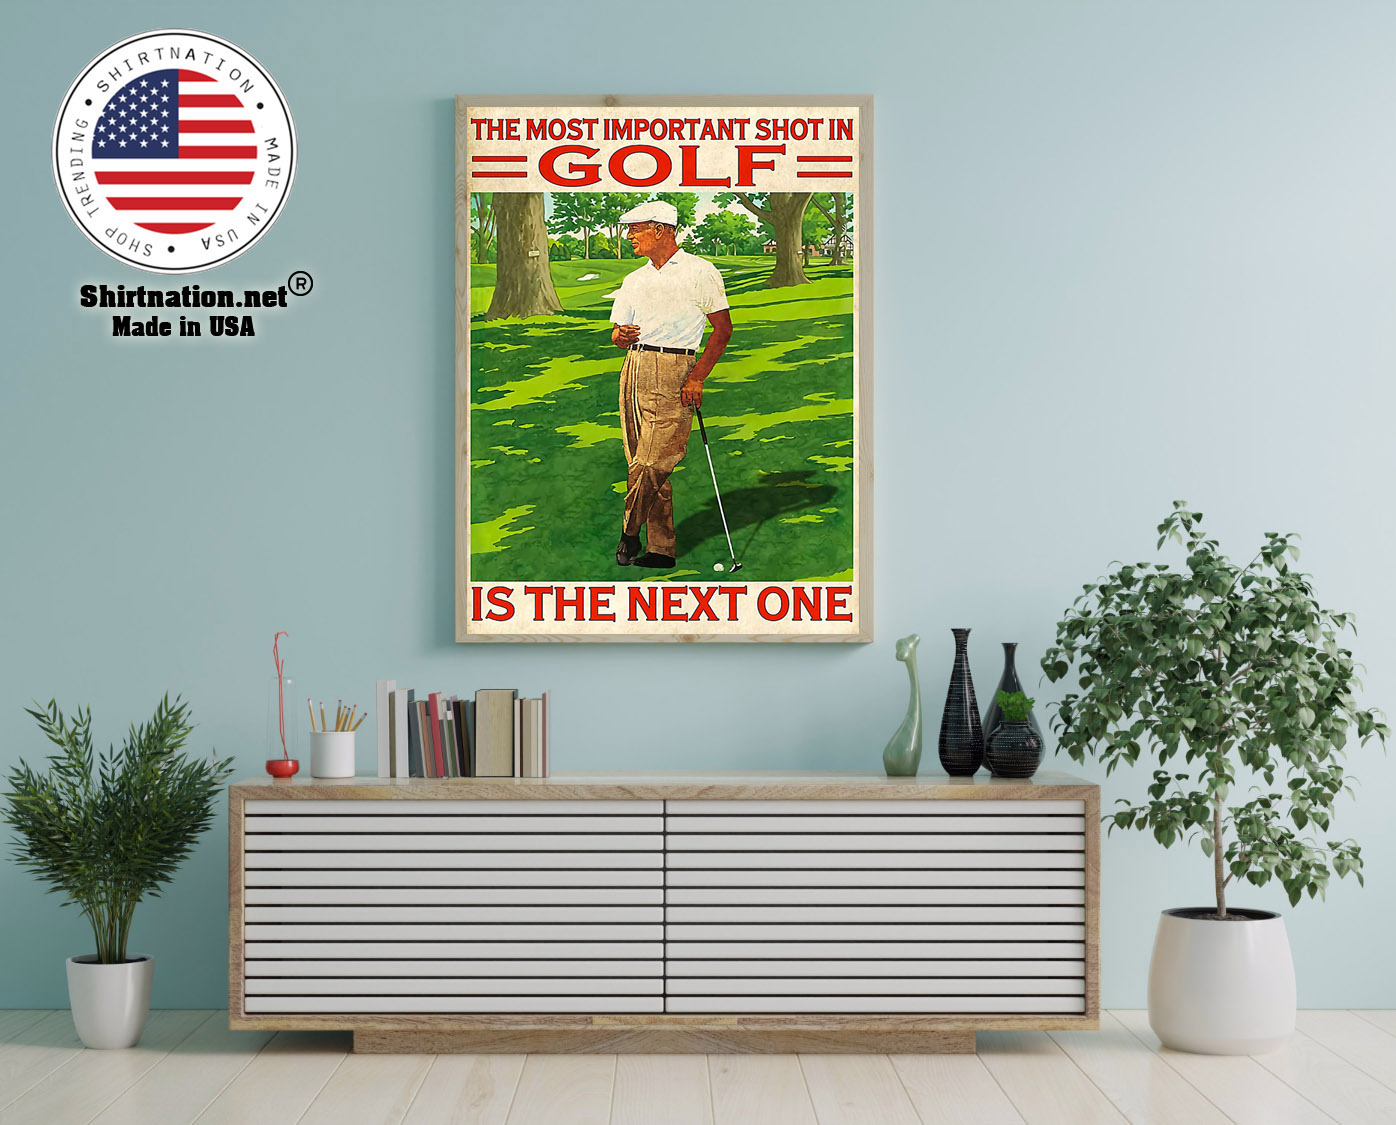 The most important shot in golf is the next one poster 12